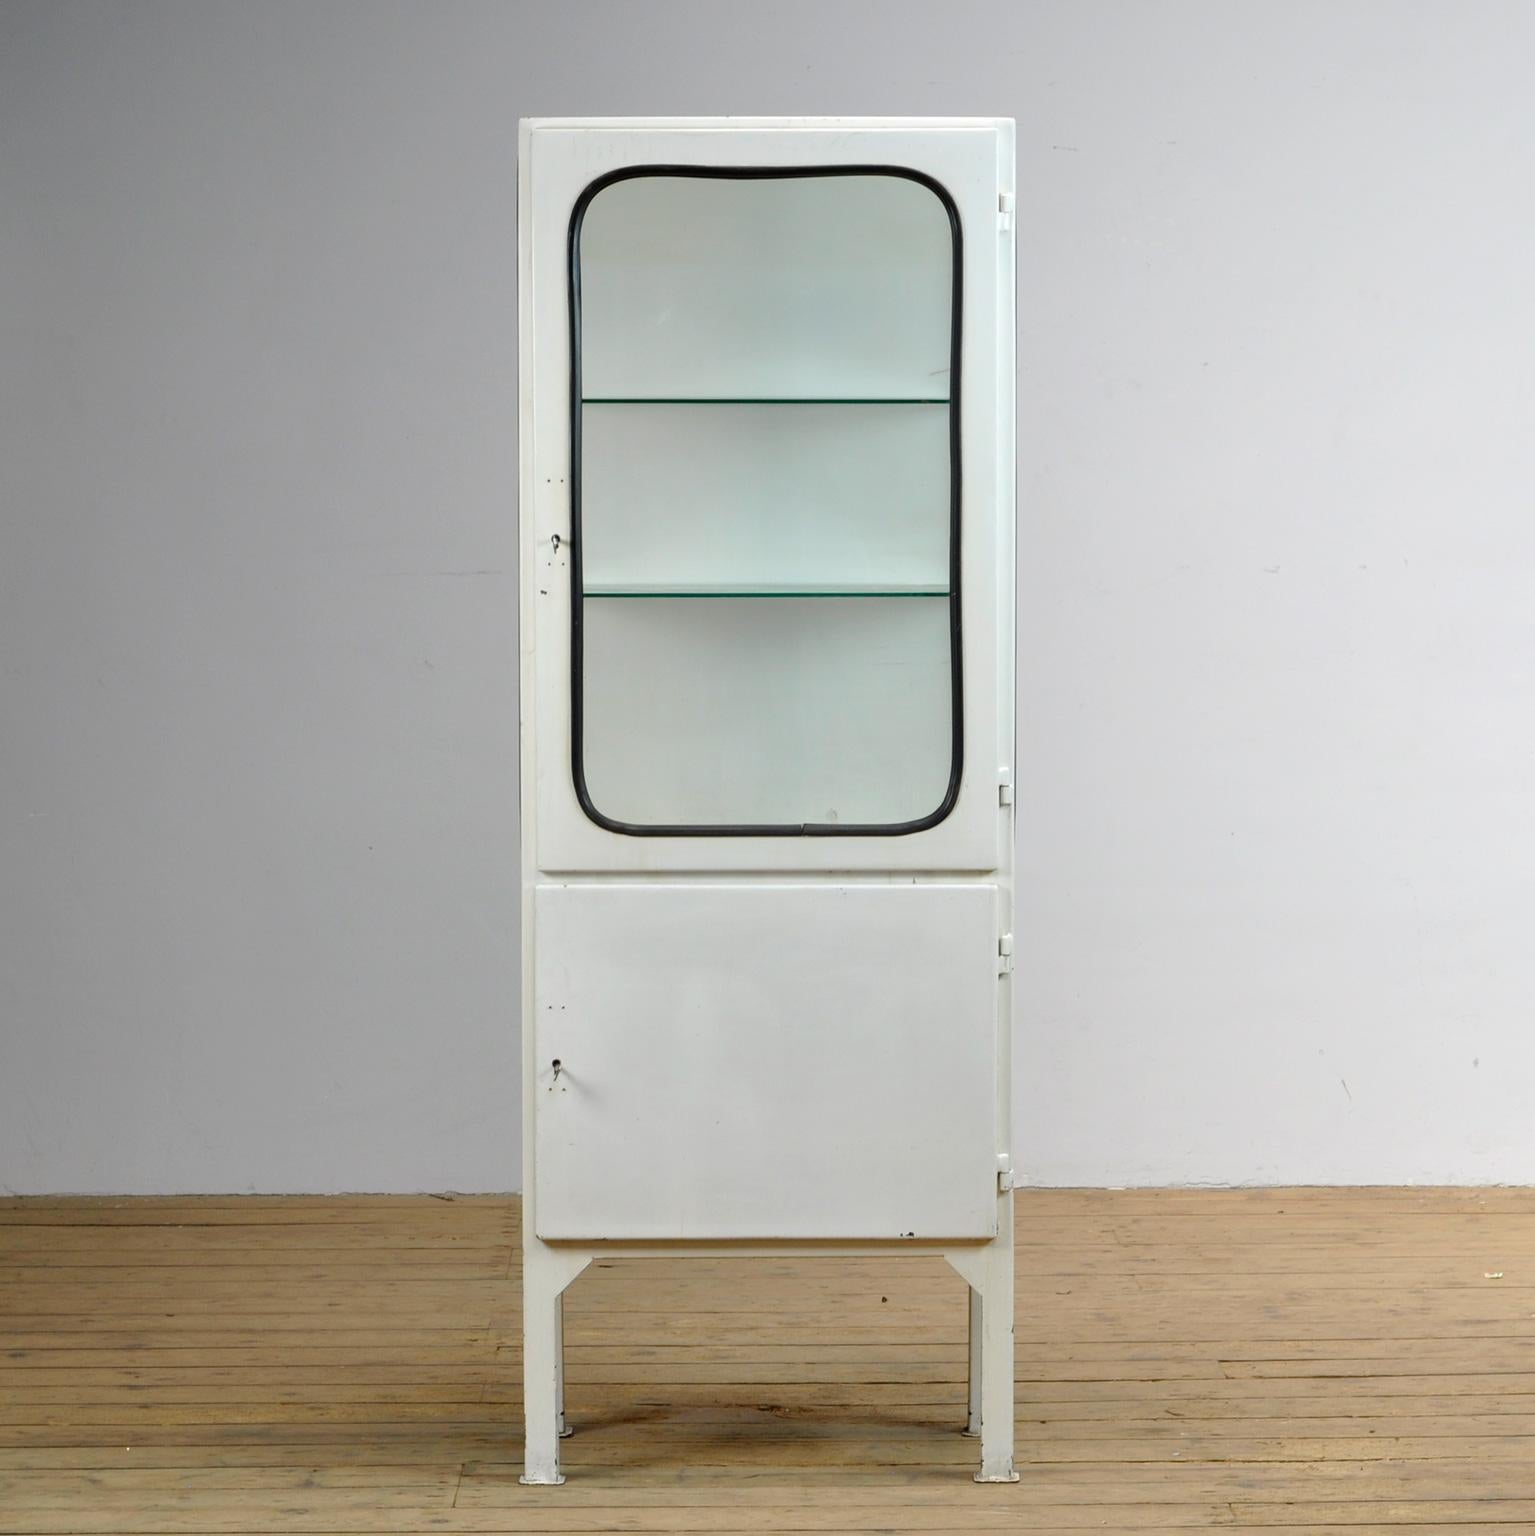  This medical cabinet was designed in the 1970s and was produced circa 1975 in hungary. It is made from iron and glass with new glass shelves. The glass is held by a black rubber strip. The cabinet features two adjustable glass shelves and